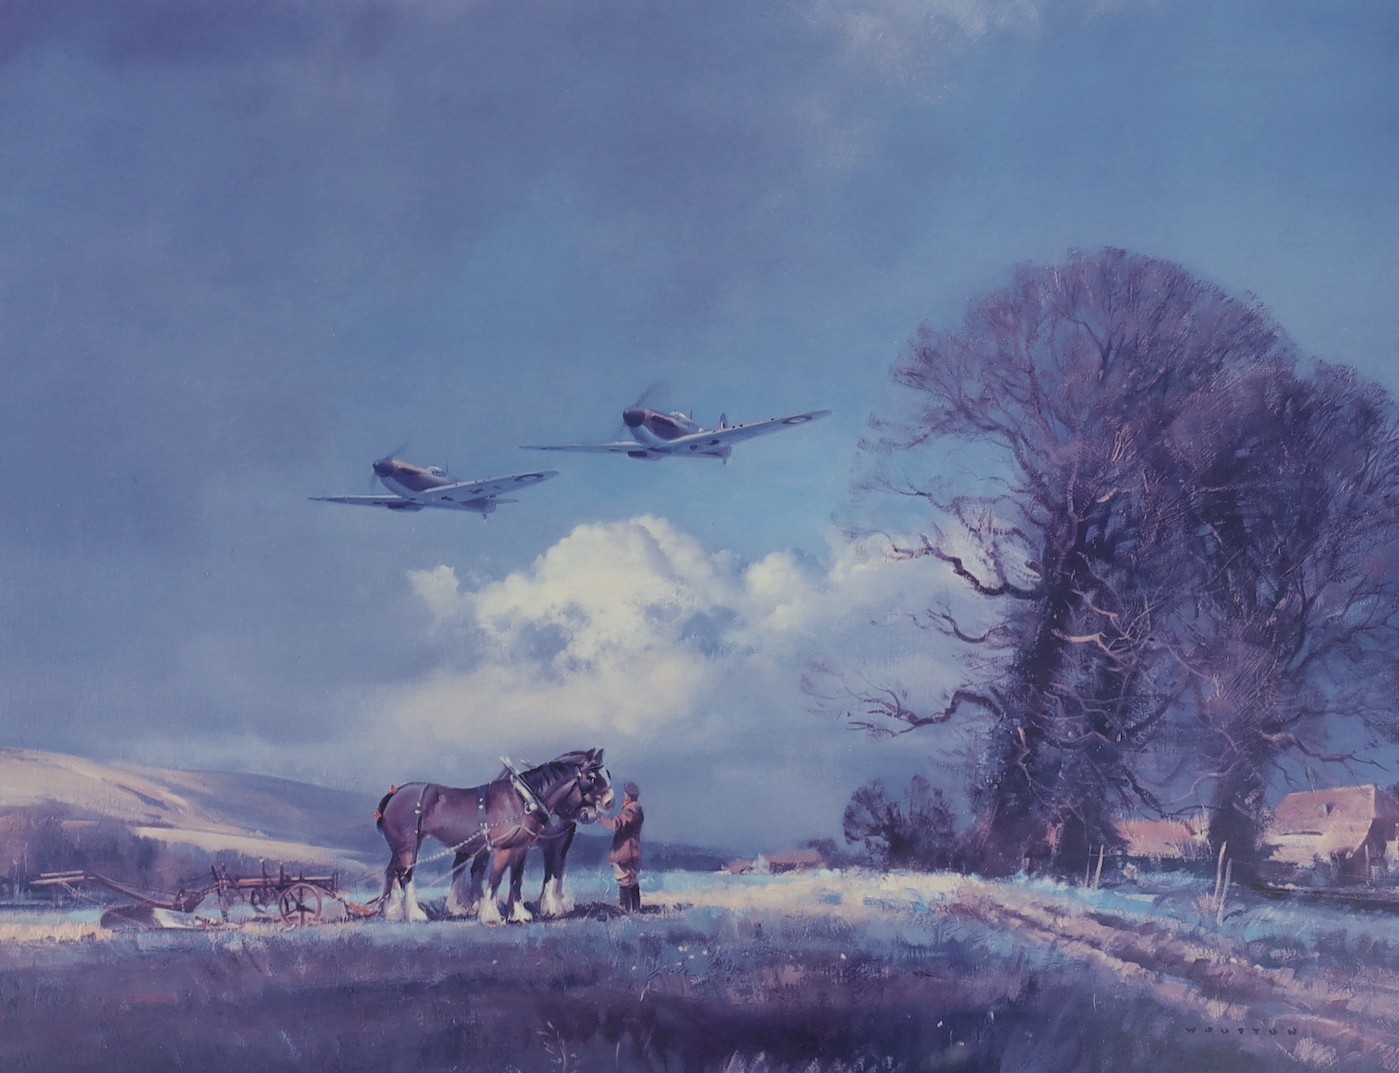 Frank Wooton, three limited edition prints; ‘Steady There, Them’s Spitfires’, 183/630, signed in pencil, 44 x 53cm, ‘Down on the Farm’, 839/1000, signed in pencil, 58 x 74cm, and ‘Under the Downs’, 22/850, signed in penc